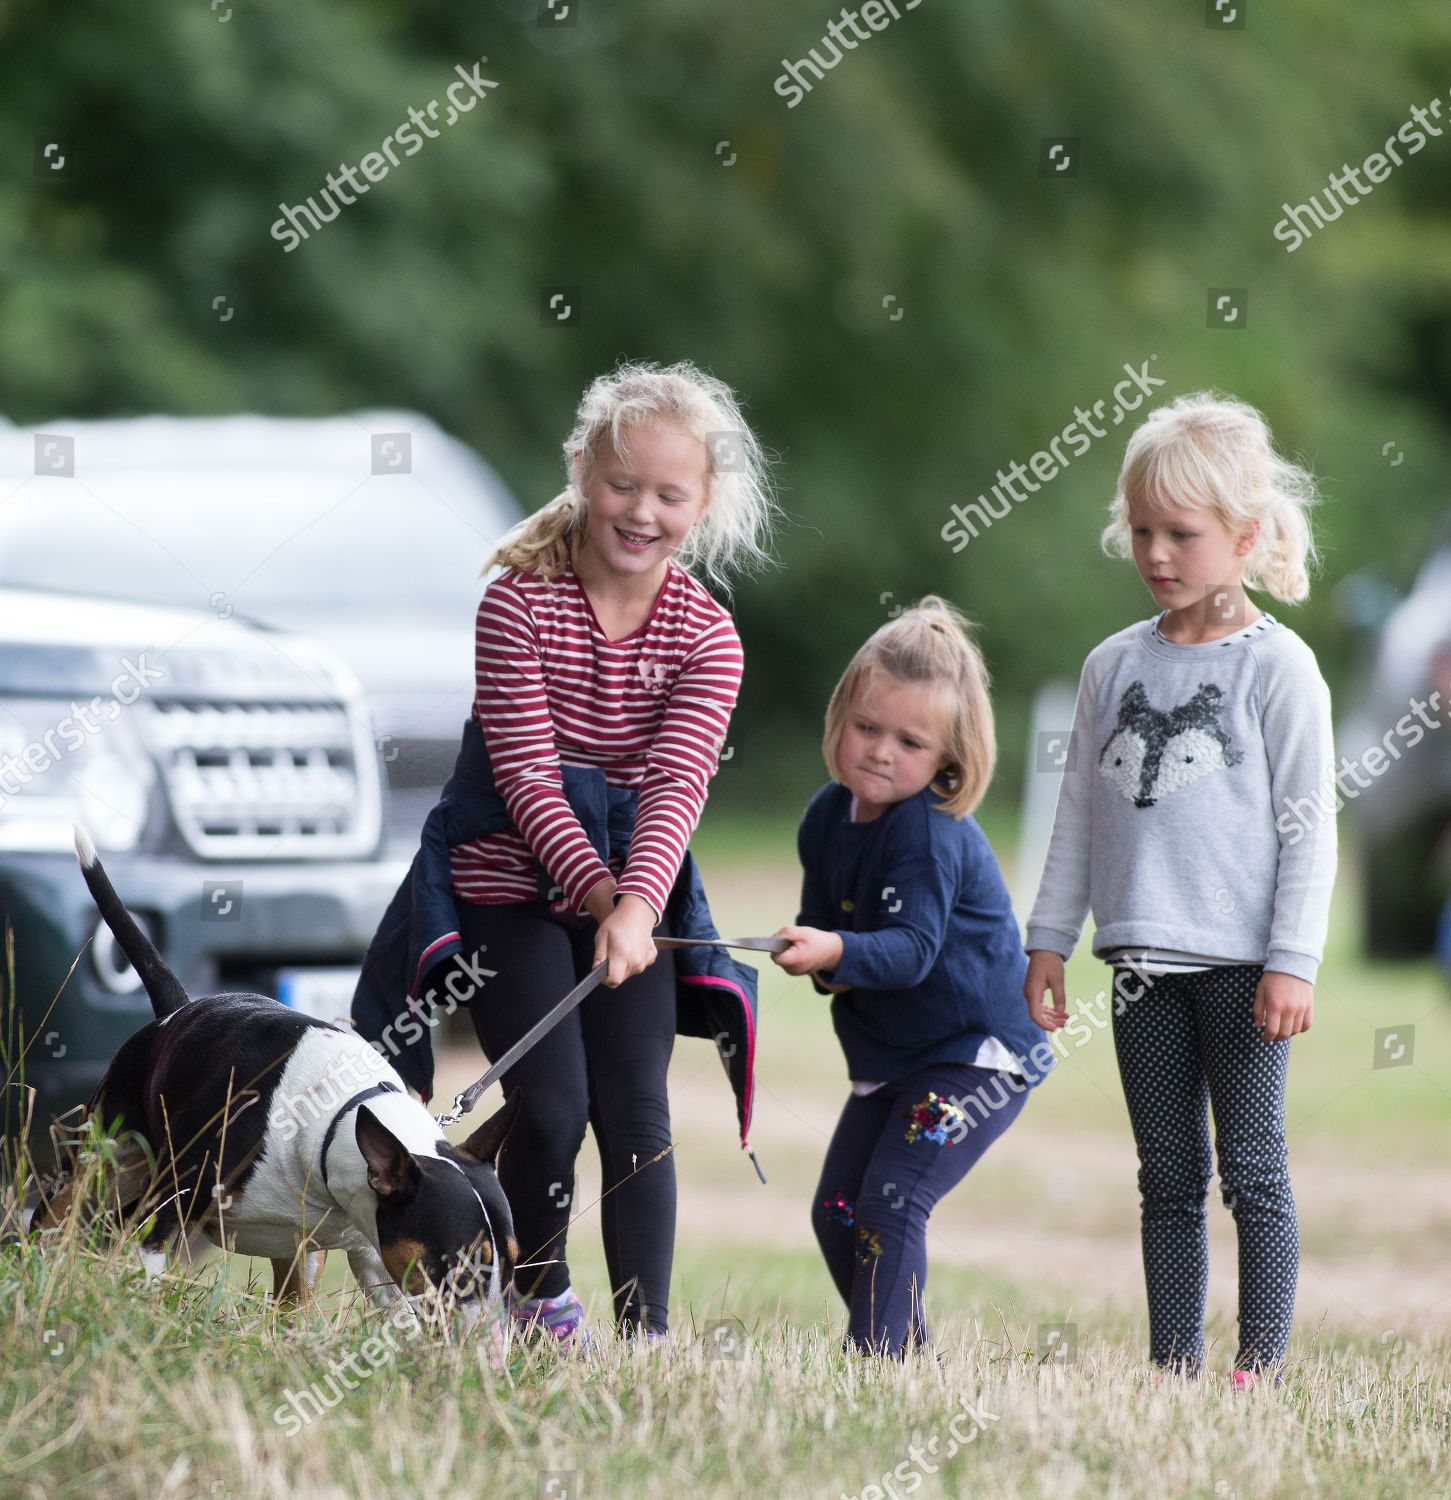 whately-manor-international-horse-trials-at-gatcombe-park-gloucestershire-uk-shutterstock-editorial-9876945q.jpg